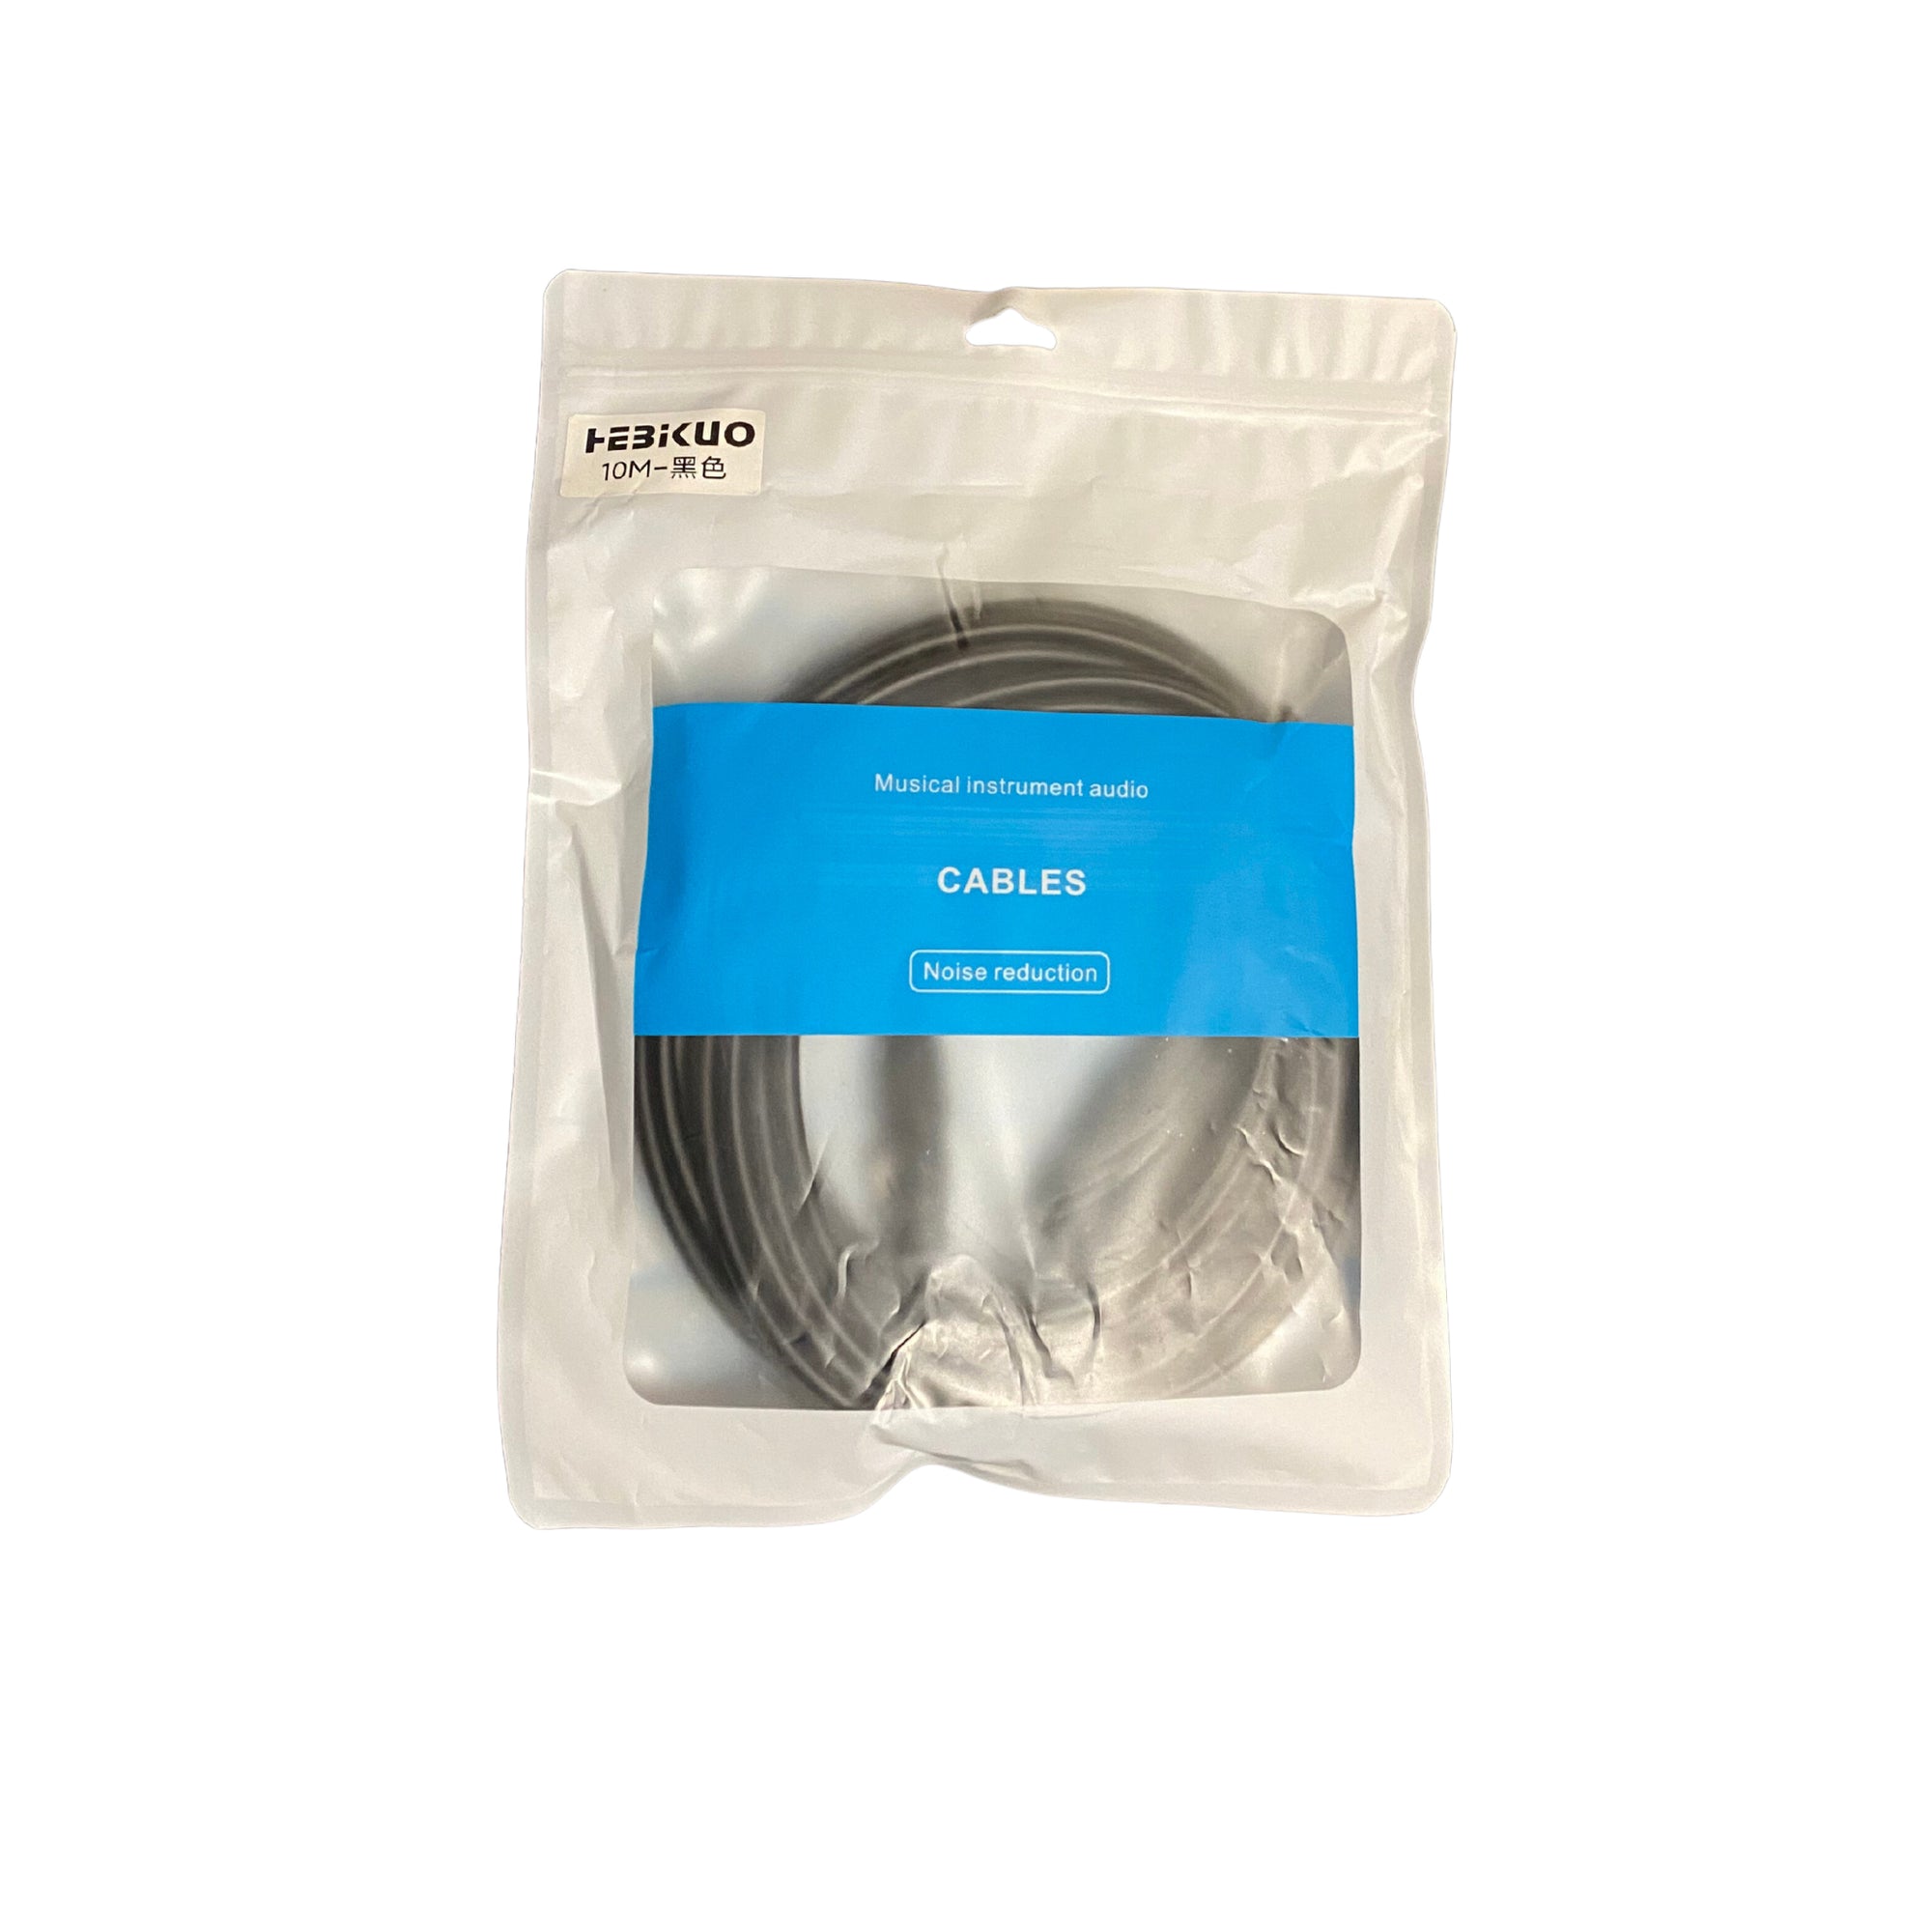 Hebikuo - 10m Microphone Cable